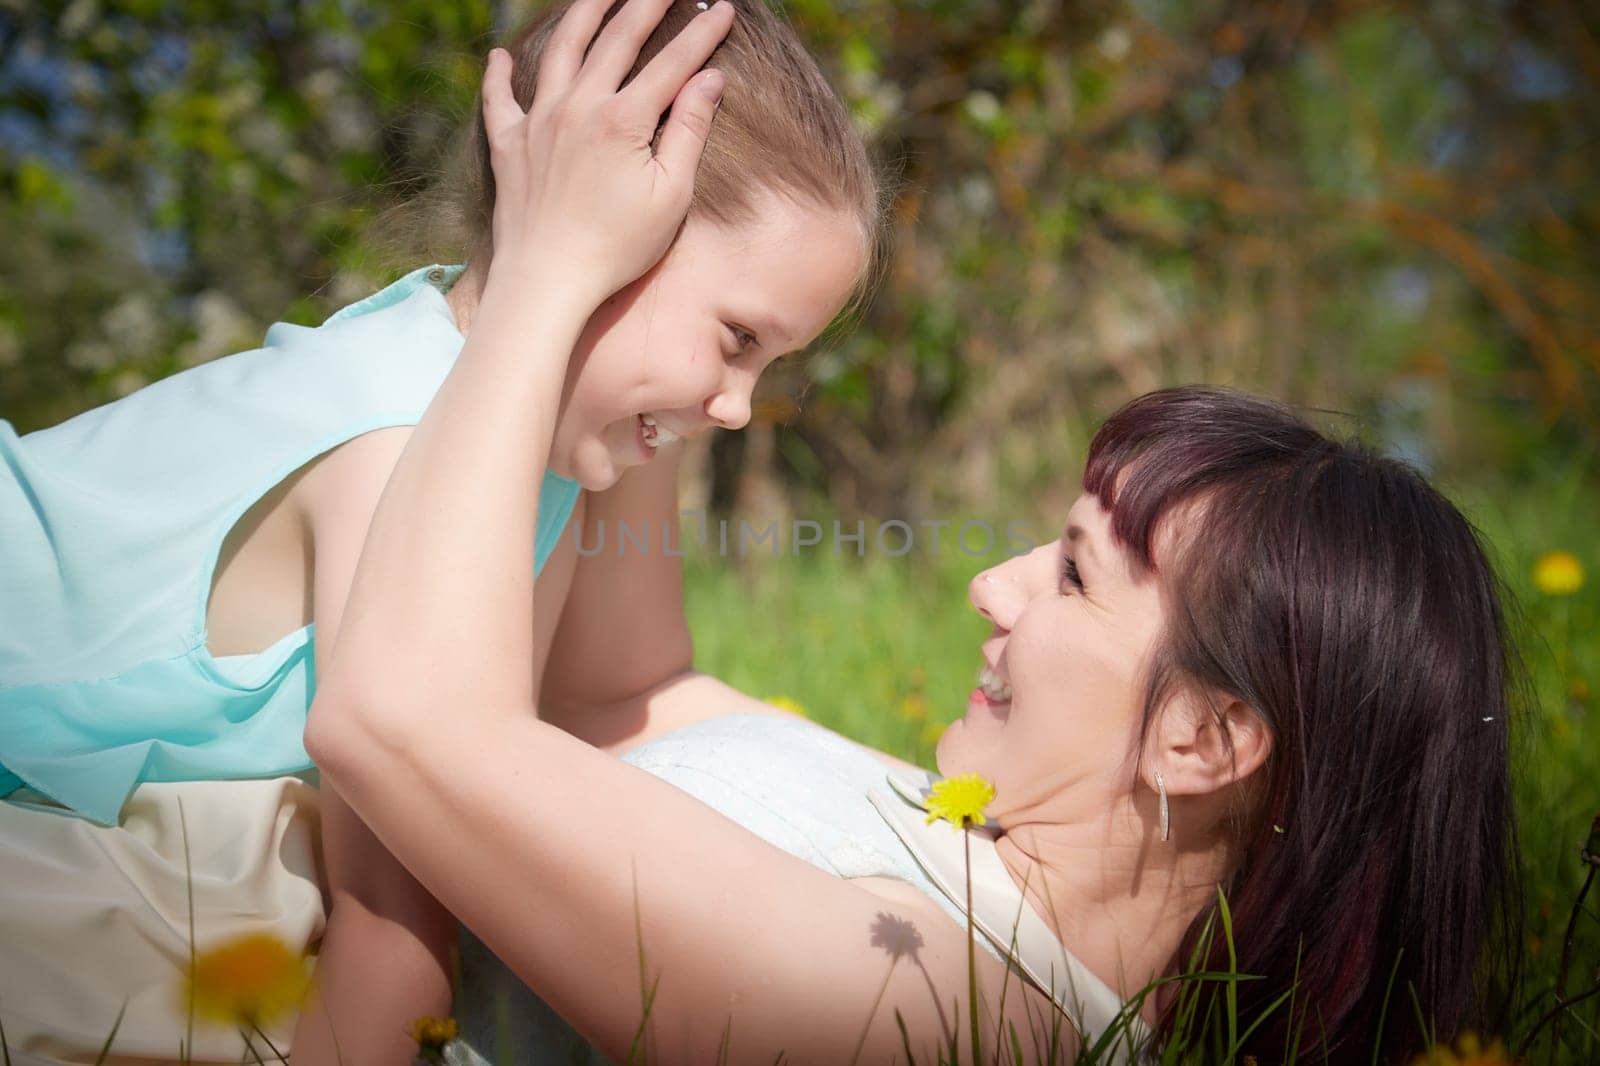 Happy mother and daughter enjoying rest, playing and fun on nature on a green lawn with dandelions and blooming apple tree on the background. Woman and girl resting outdoors in summer and spring day by keleny